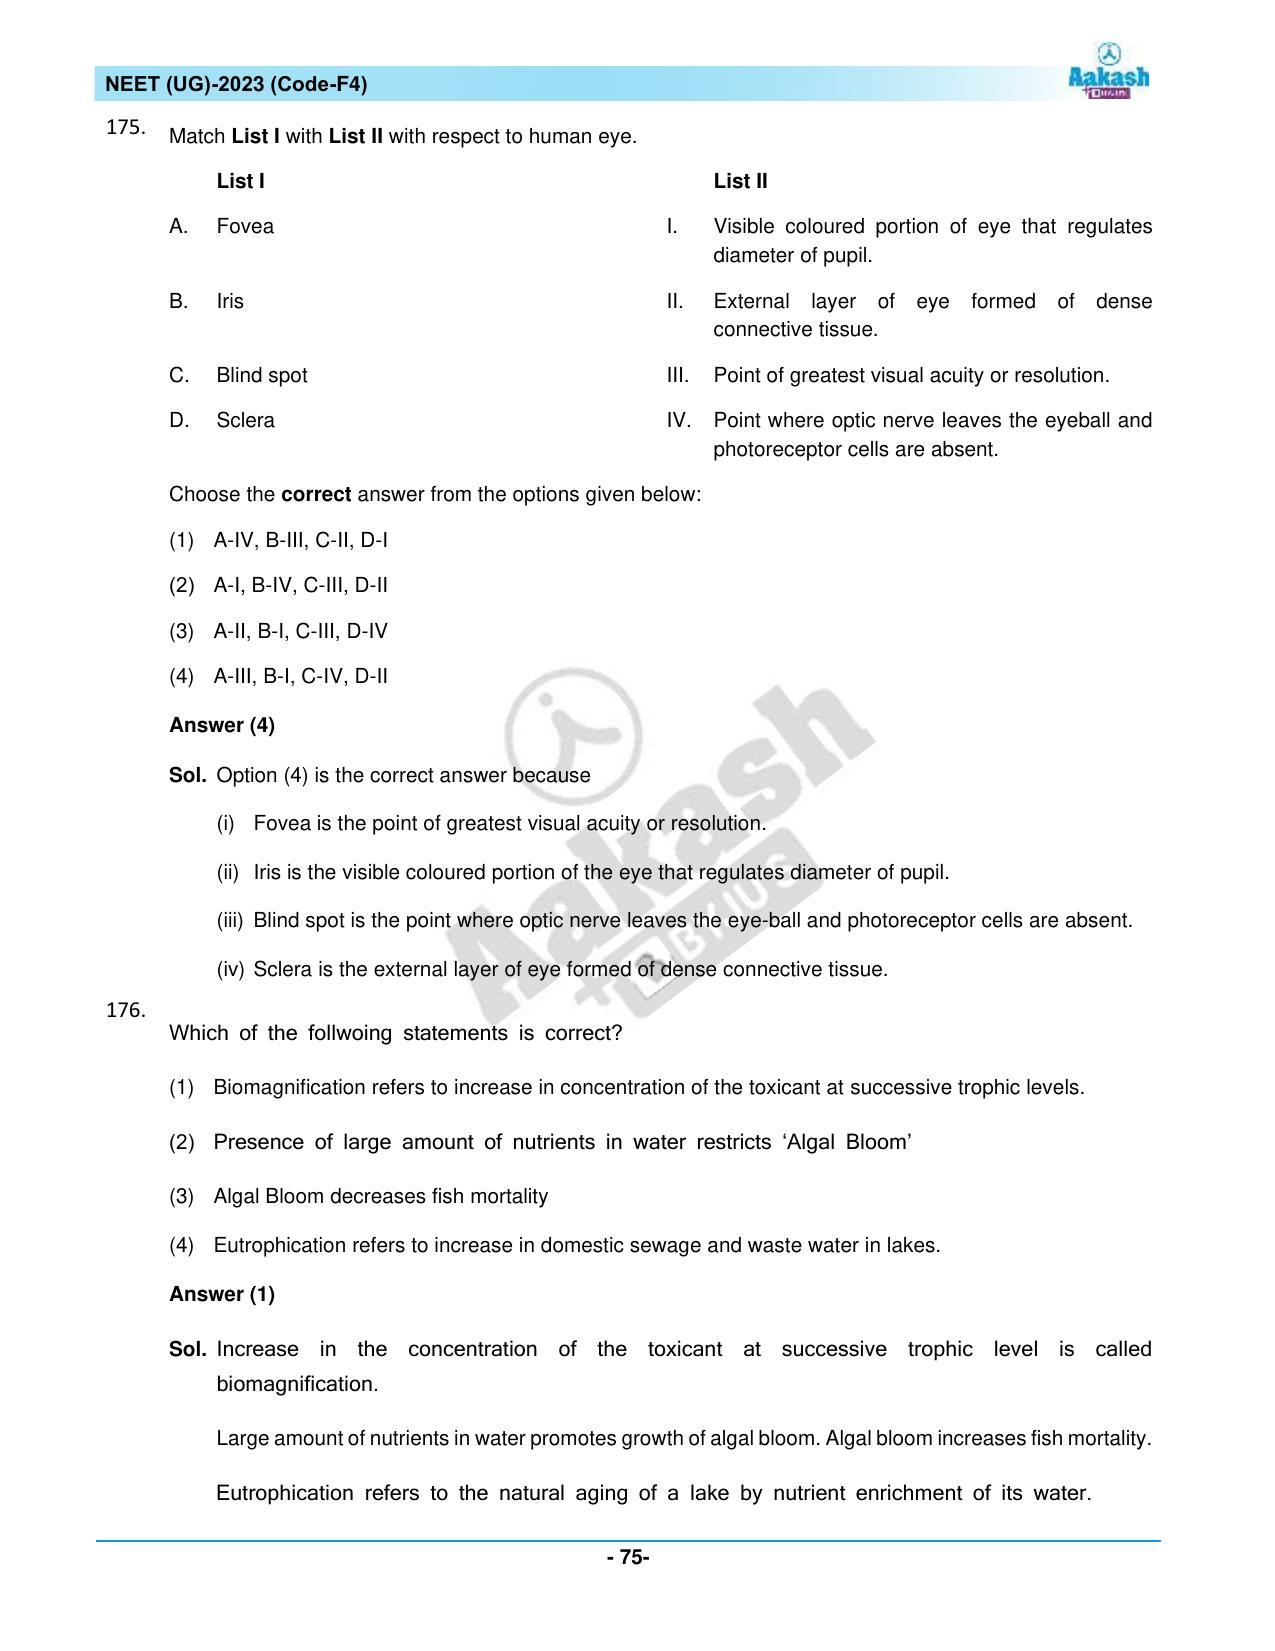 NEET 2023 Question Paper F4 - Page 75